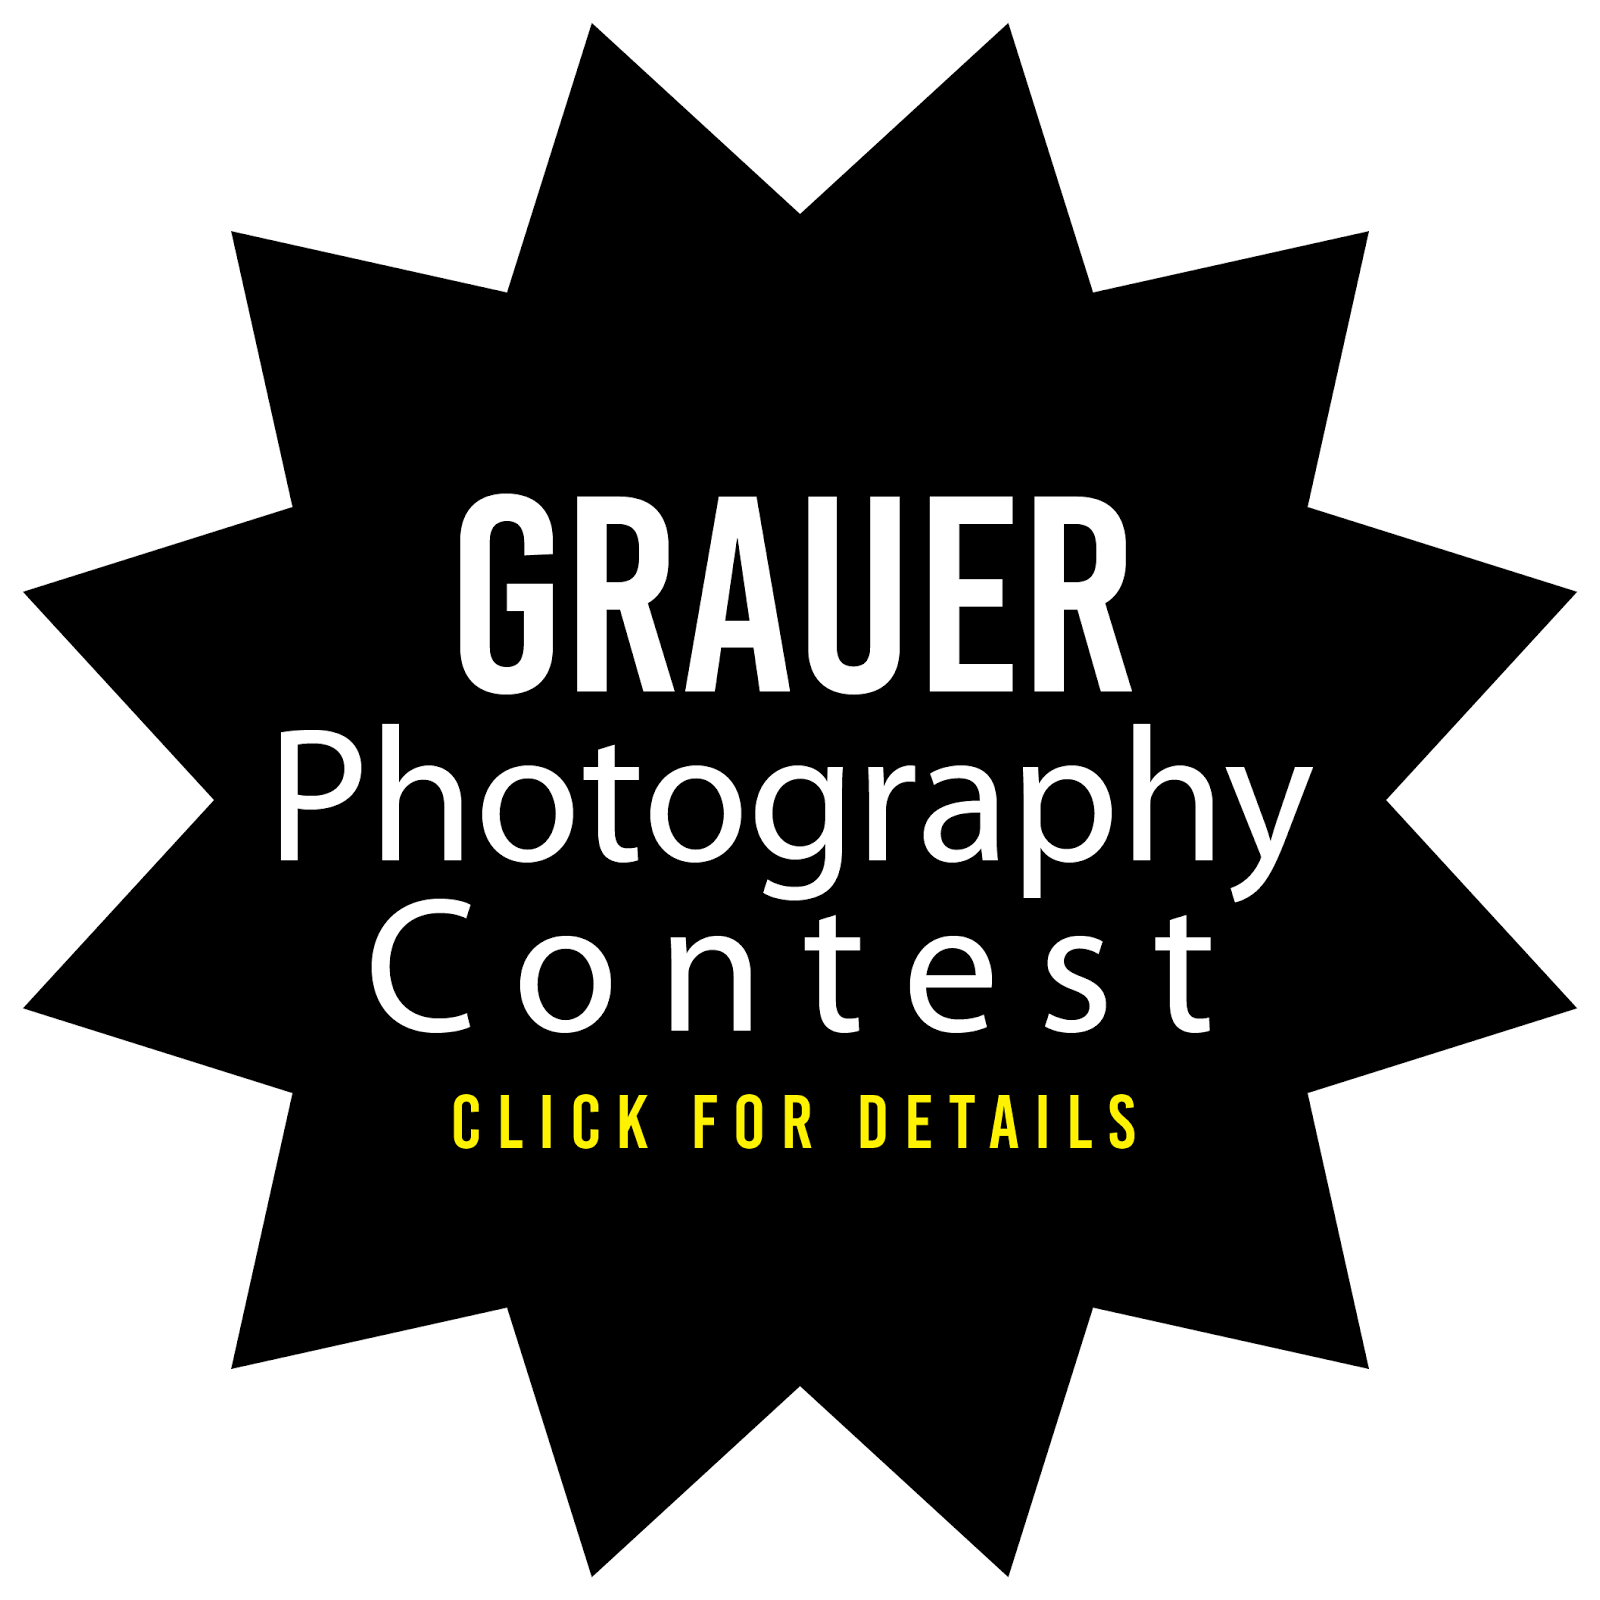 Grauer Photography Contest Details / Submission